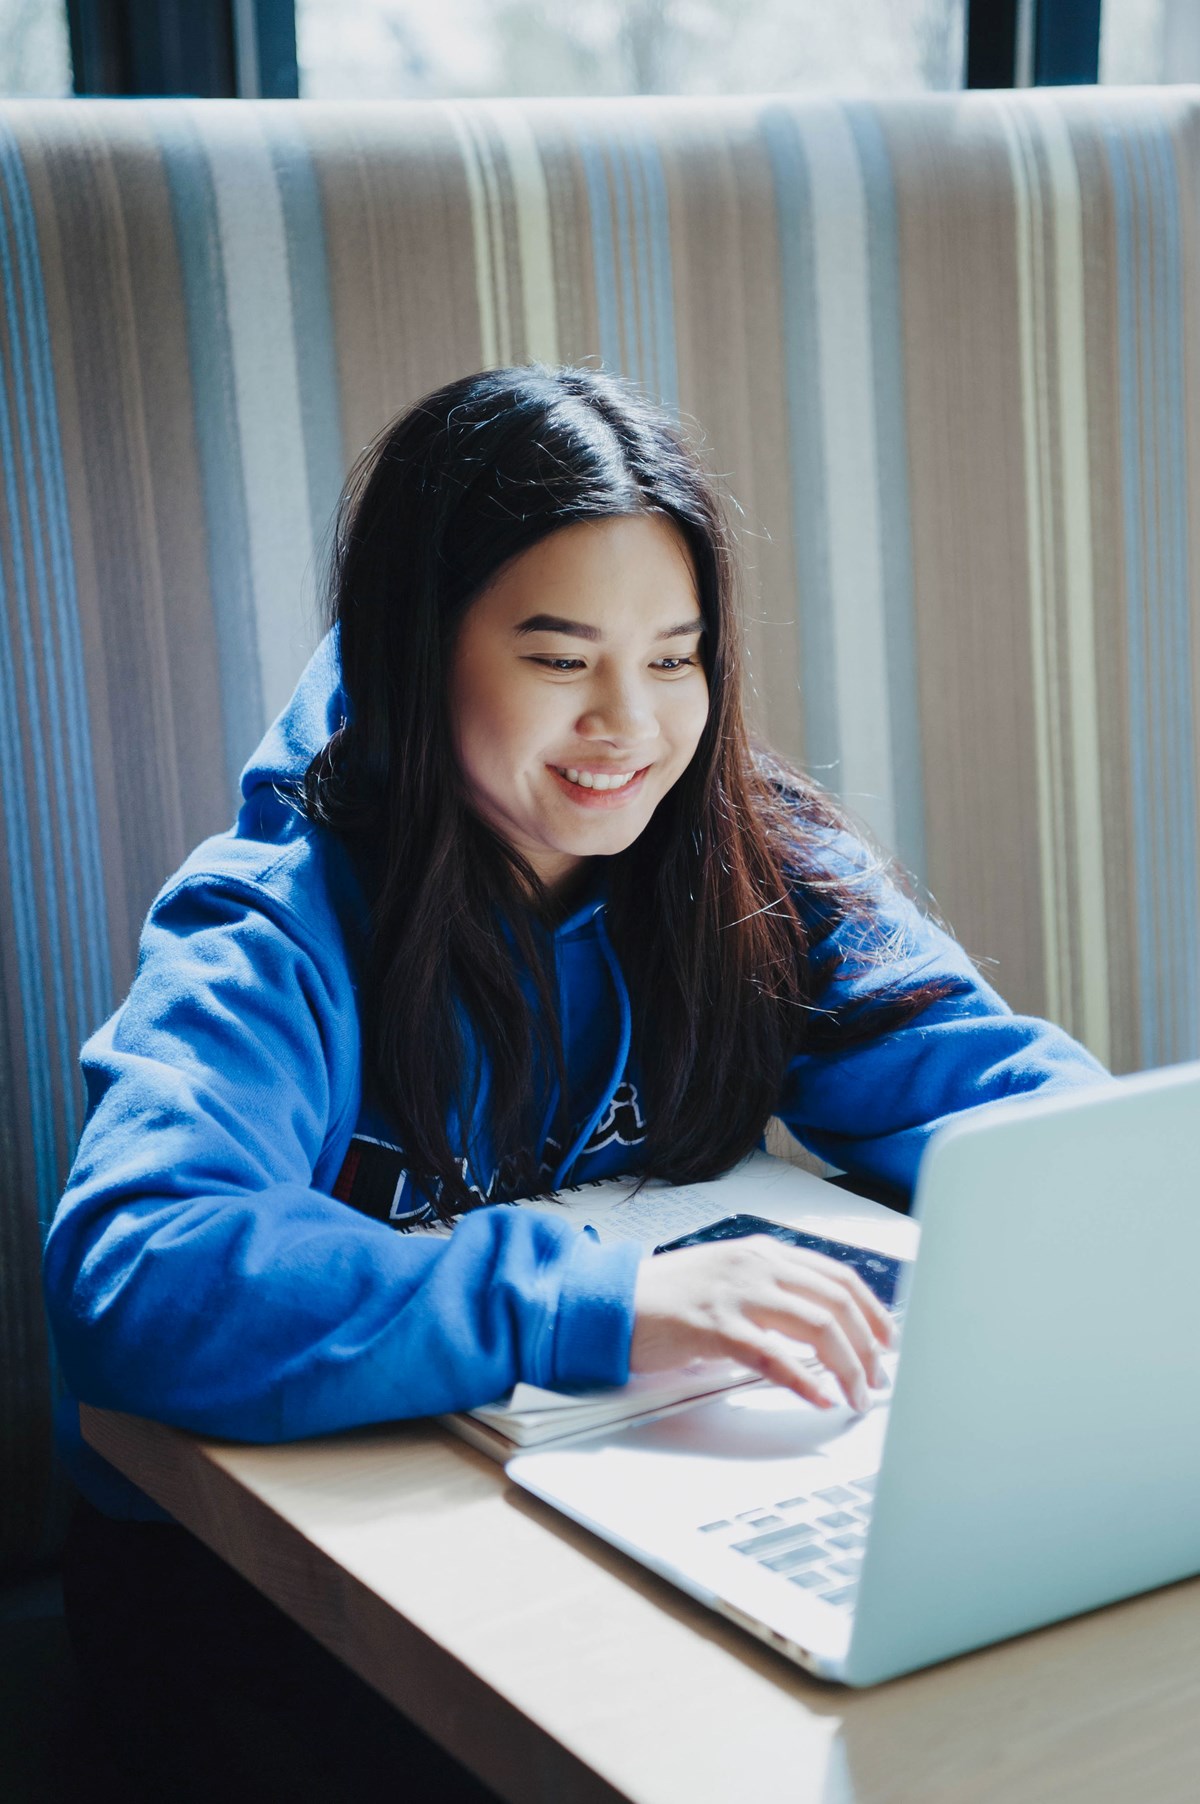 A female student types on a laptop smiling.